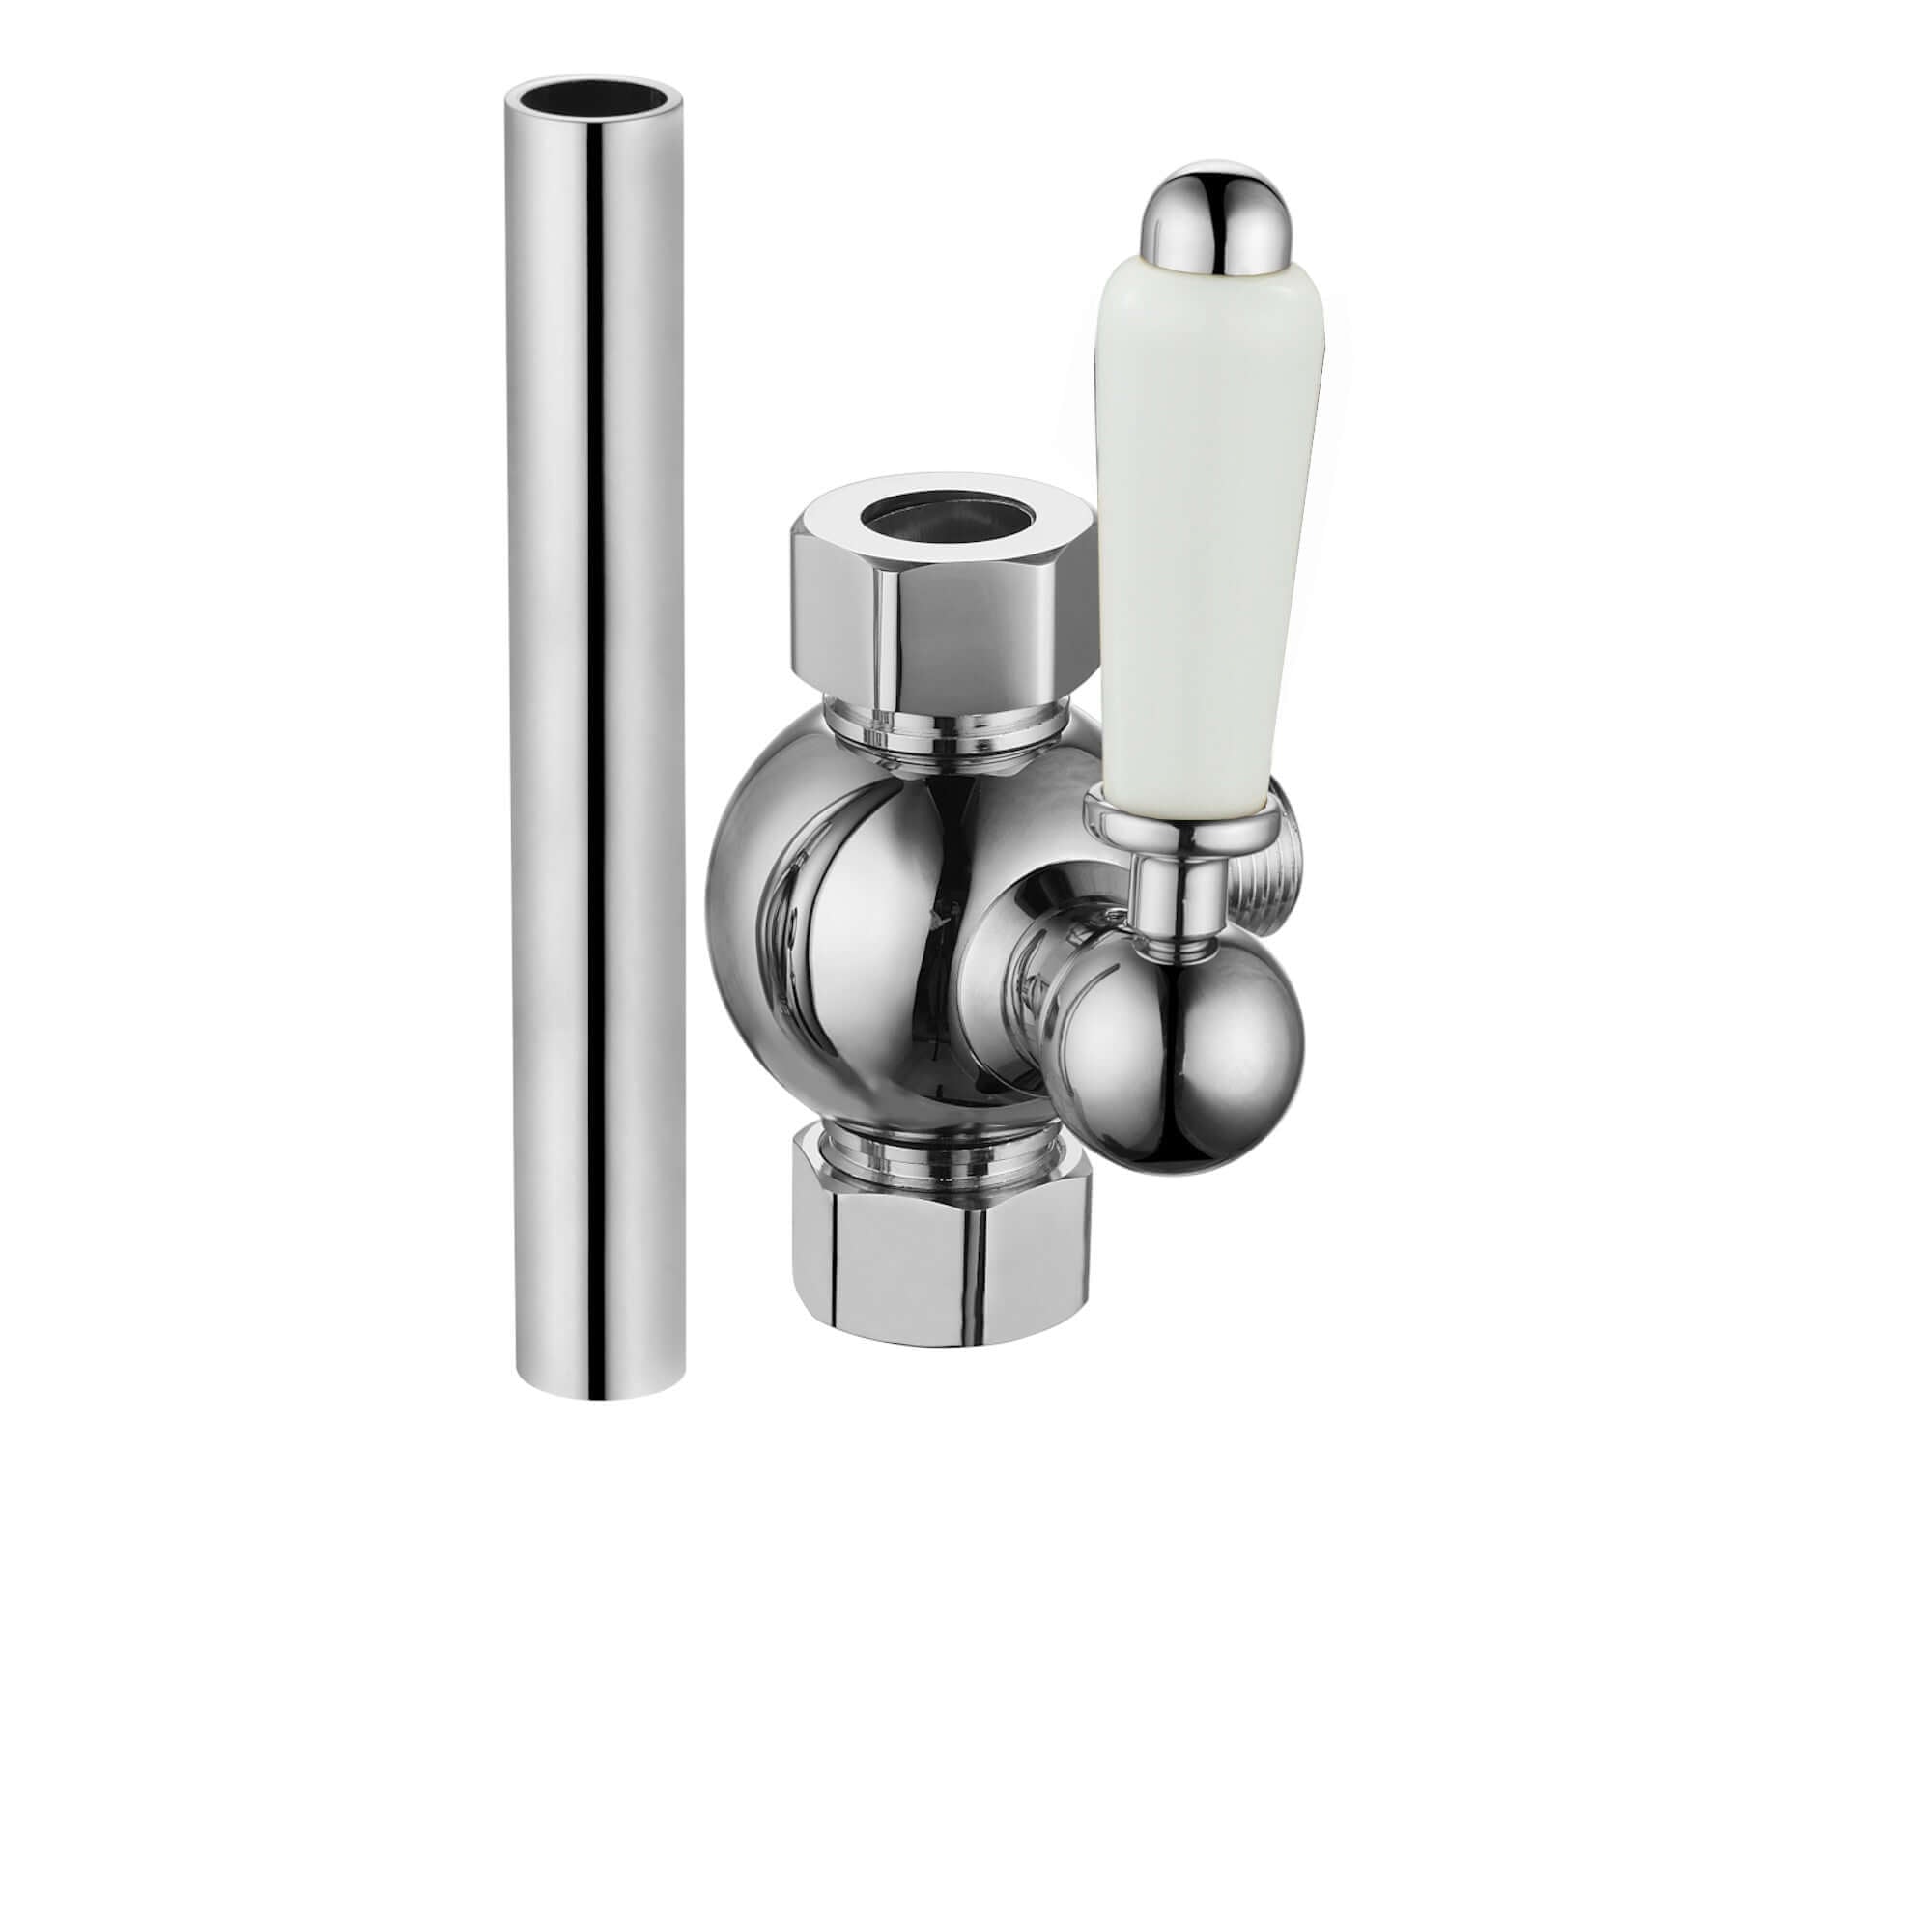 Downton traditional shower diverter with 18mm diameter extension pipe - chrome & white - Showers